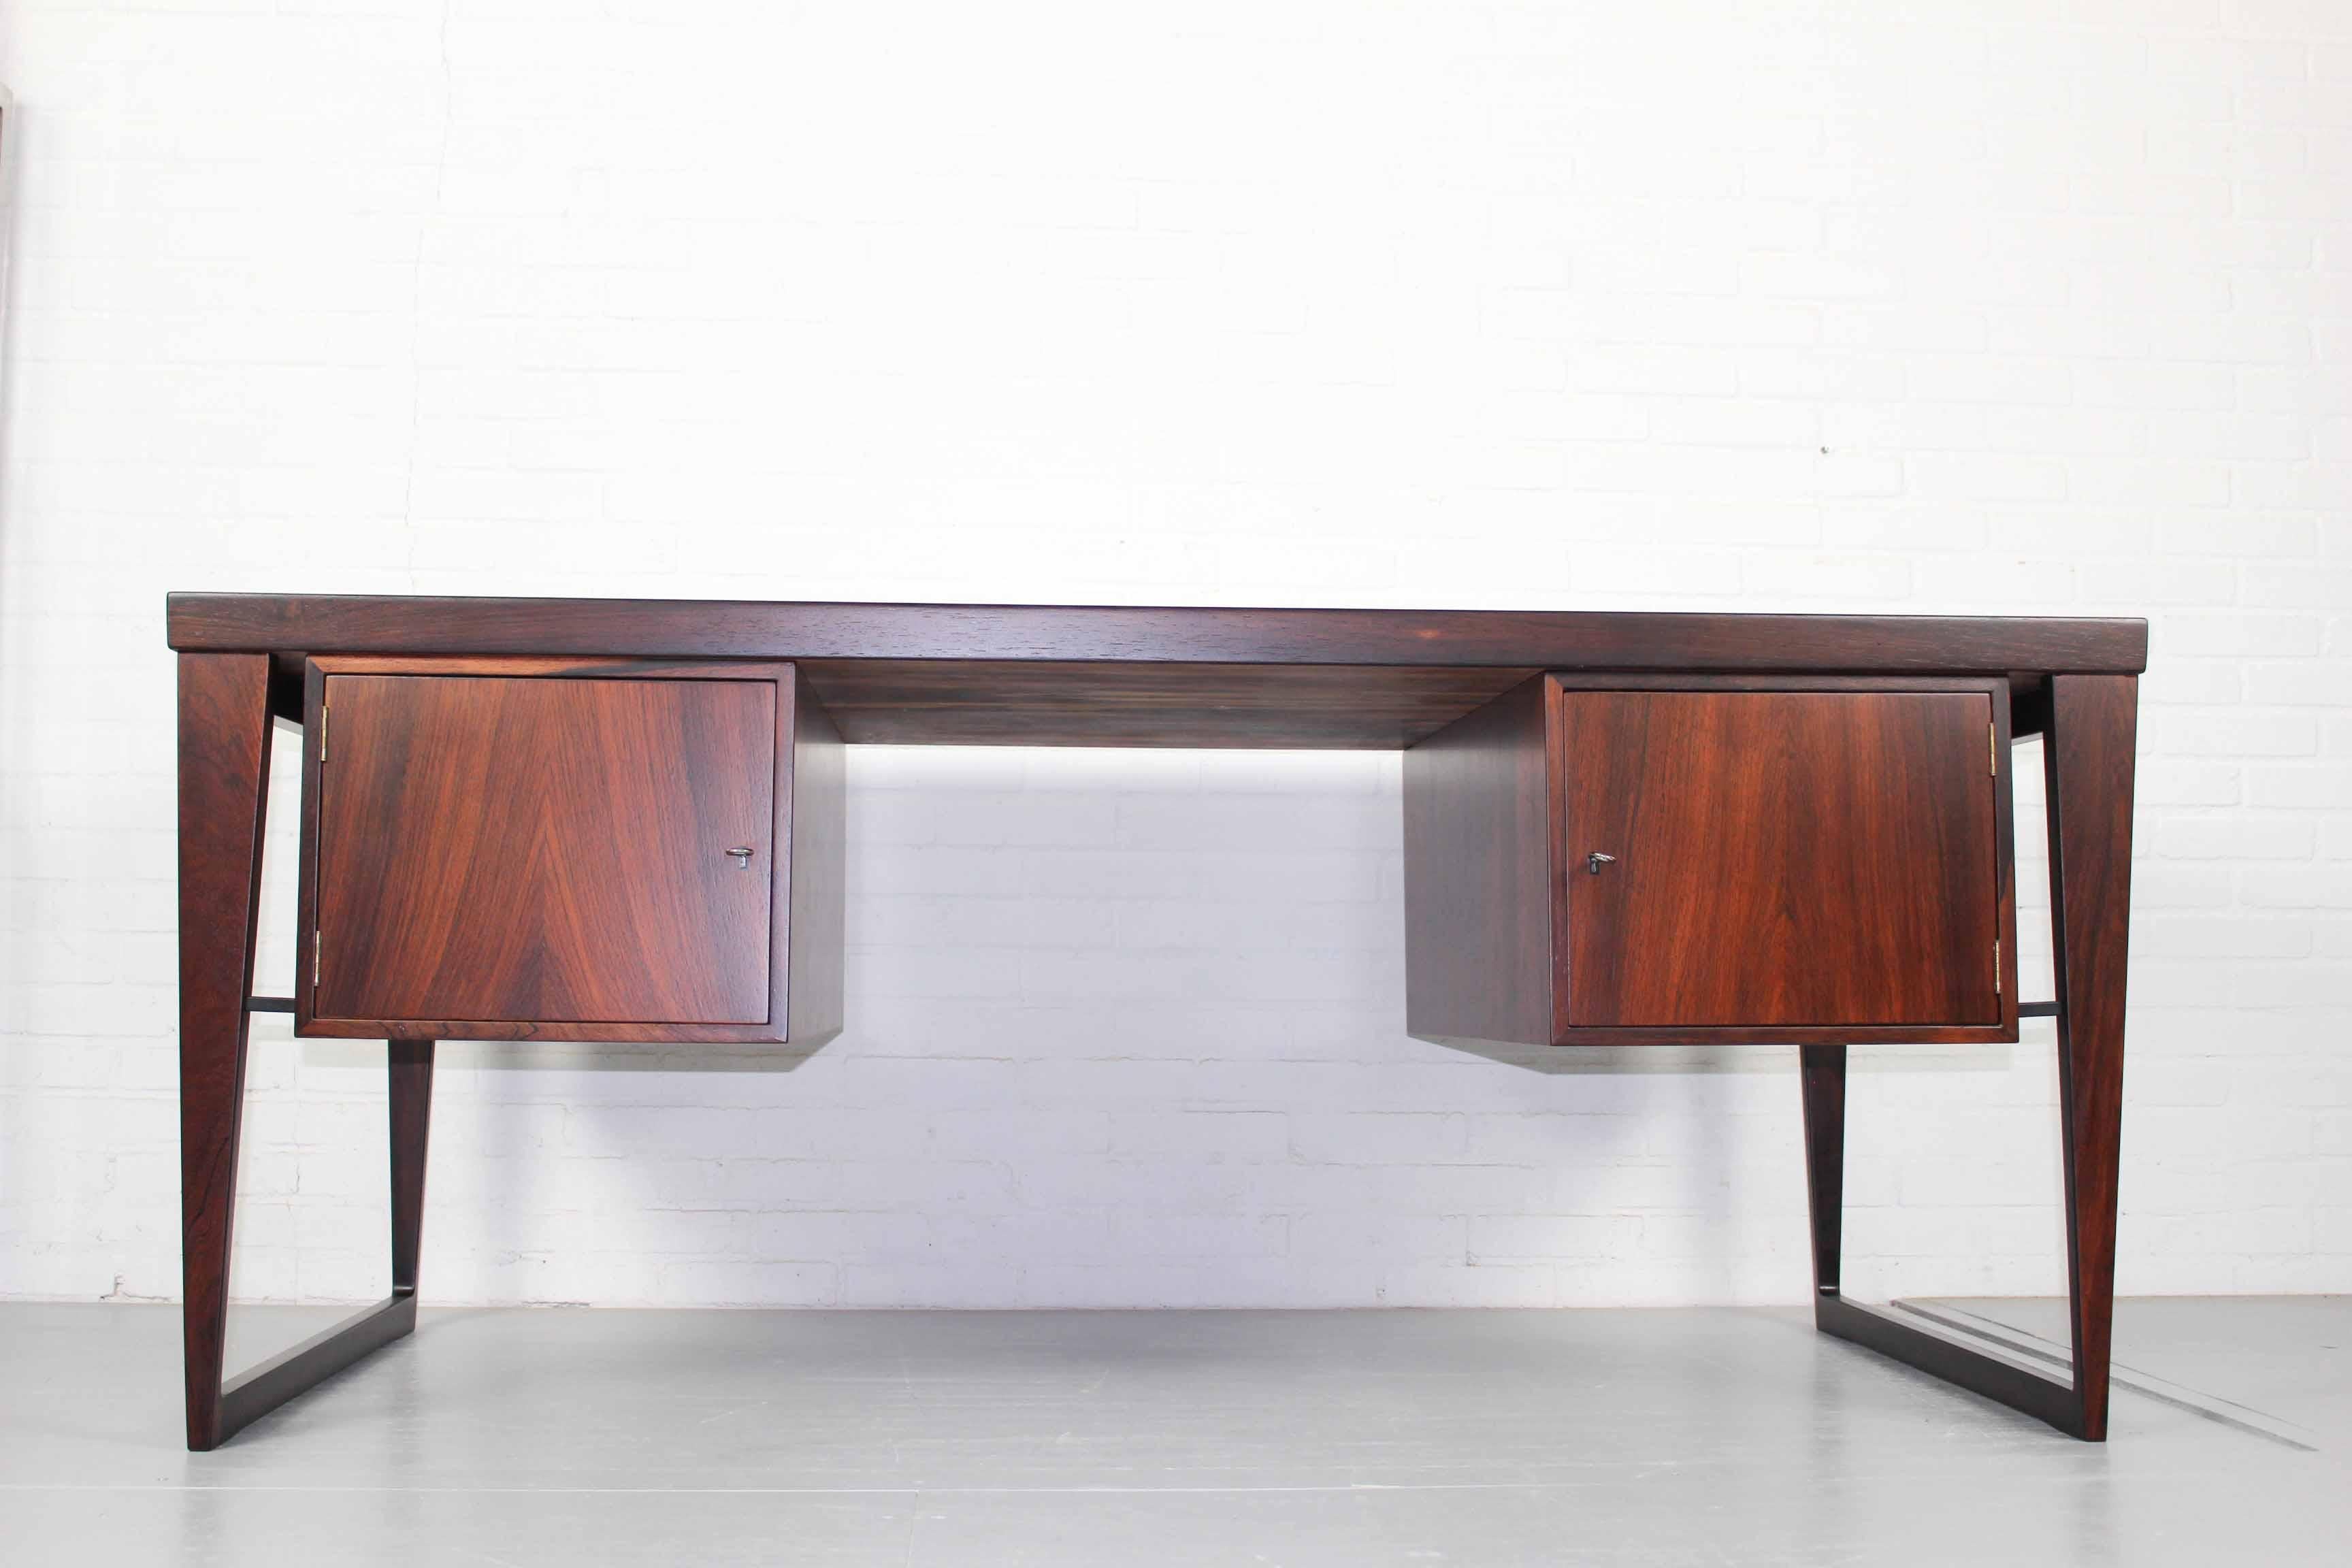 Sophisticated minimalist executive rosewood desk model 70 by Kai Kristiansen for Feldballes Mobelfabrik, 1950s. The desk provides for plenty of storage space with its 6 drawers on the front and 2 doors at the back. The desk looks amazing from all